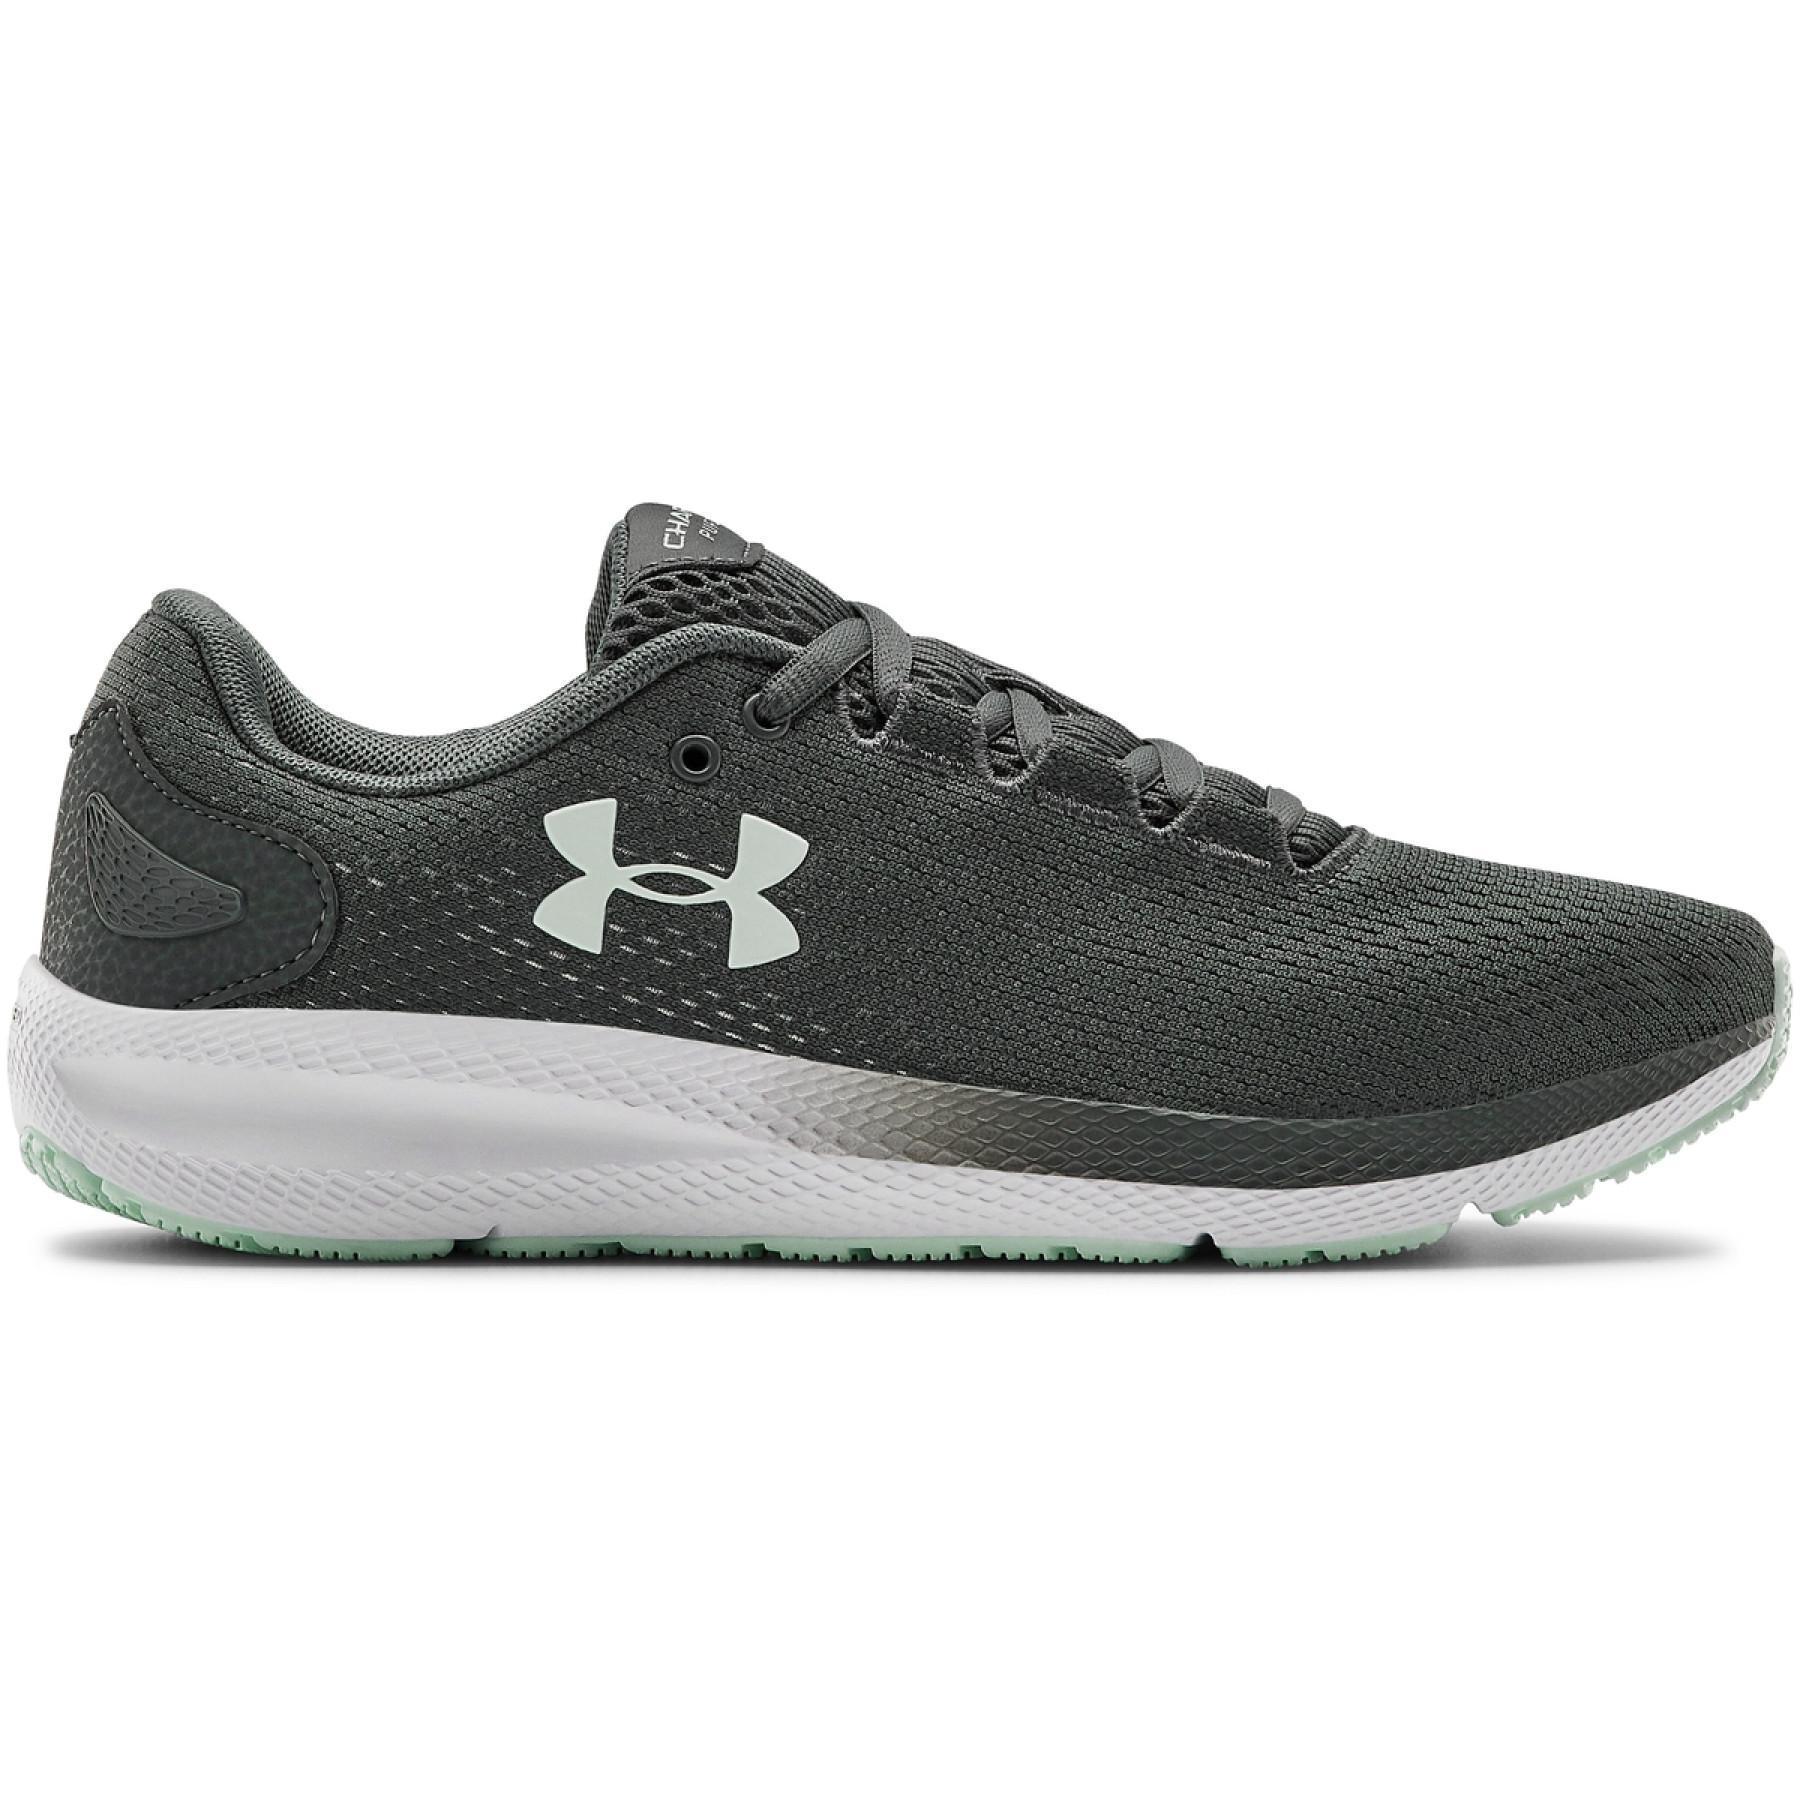 Zapatillas de running para mujer Under Armour Charged Pursuit 2